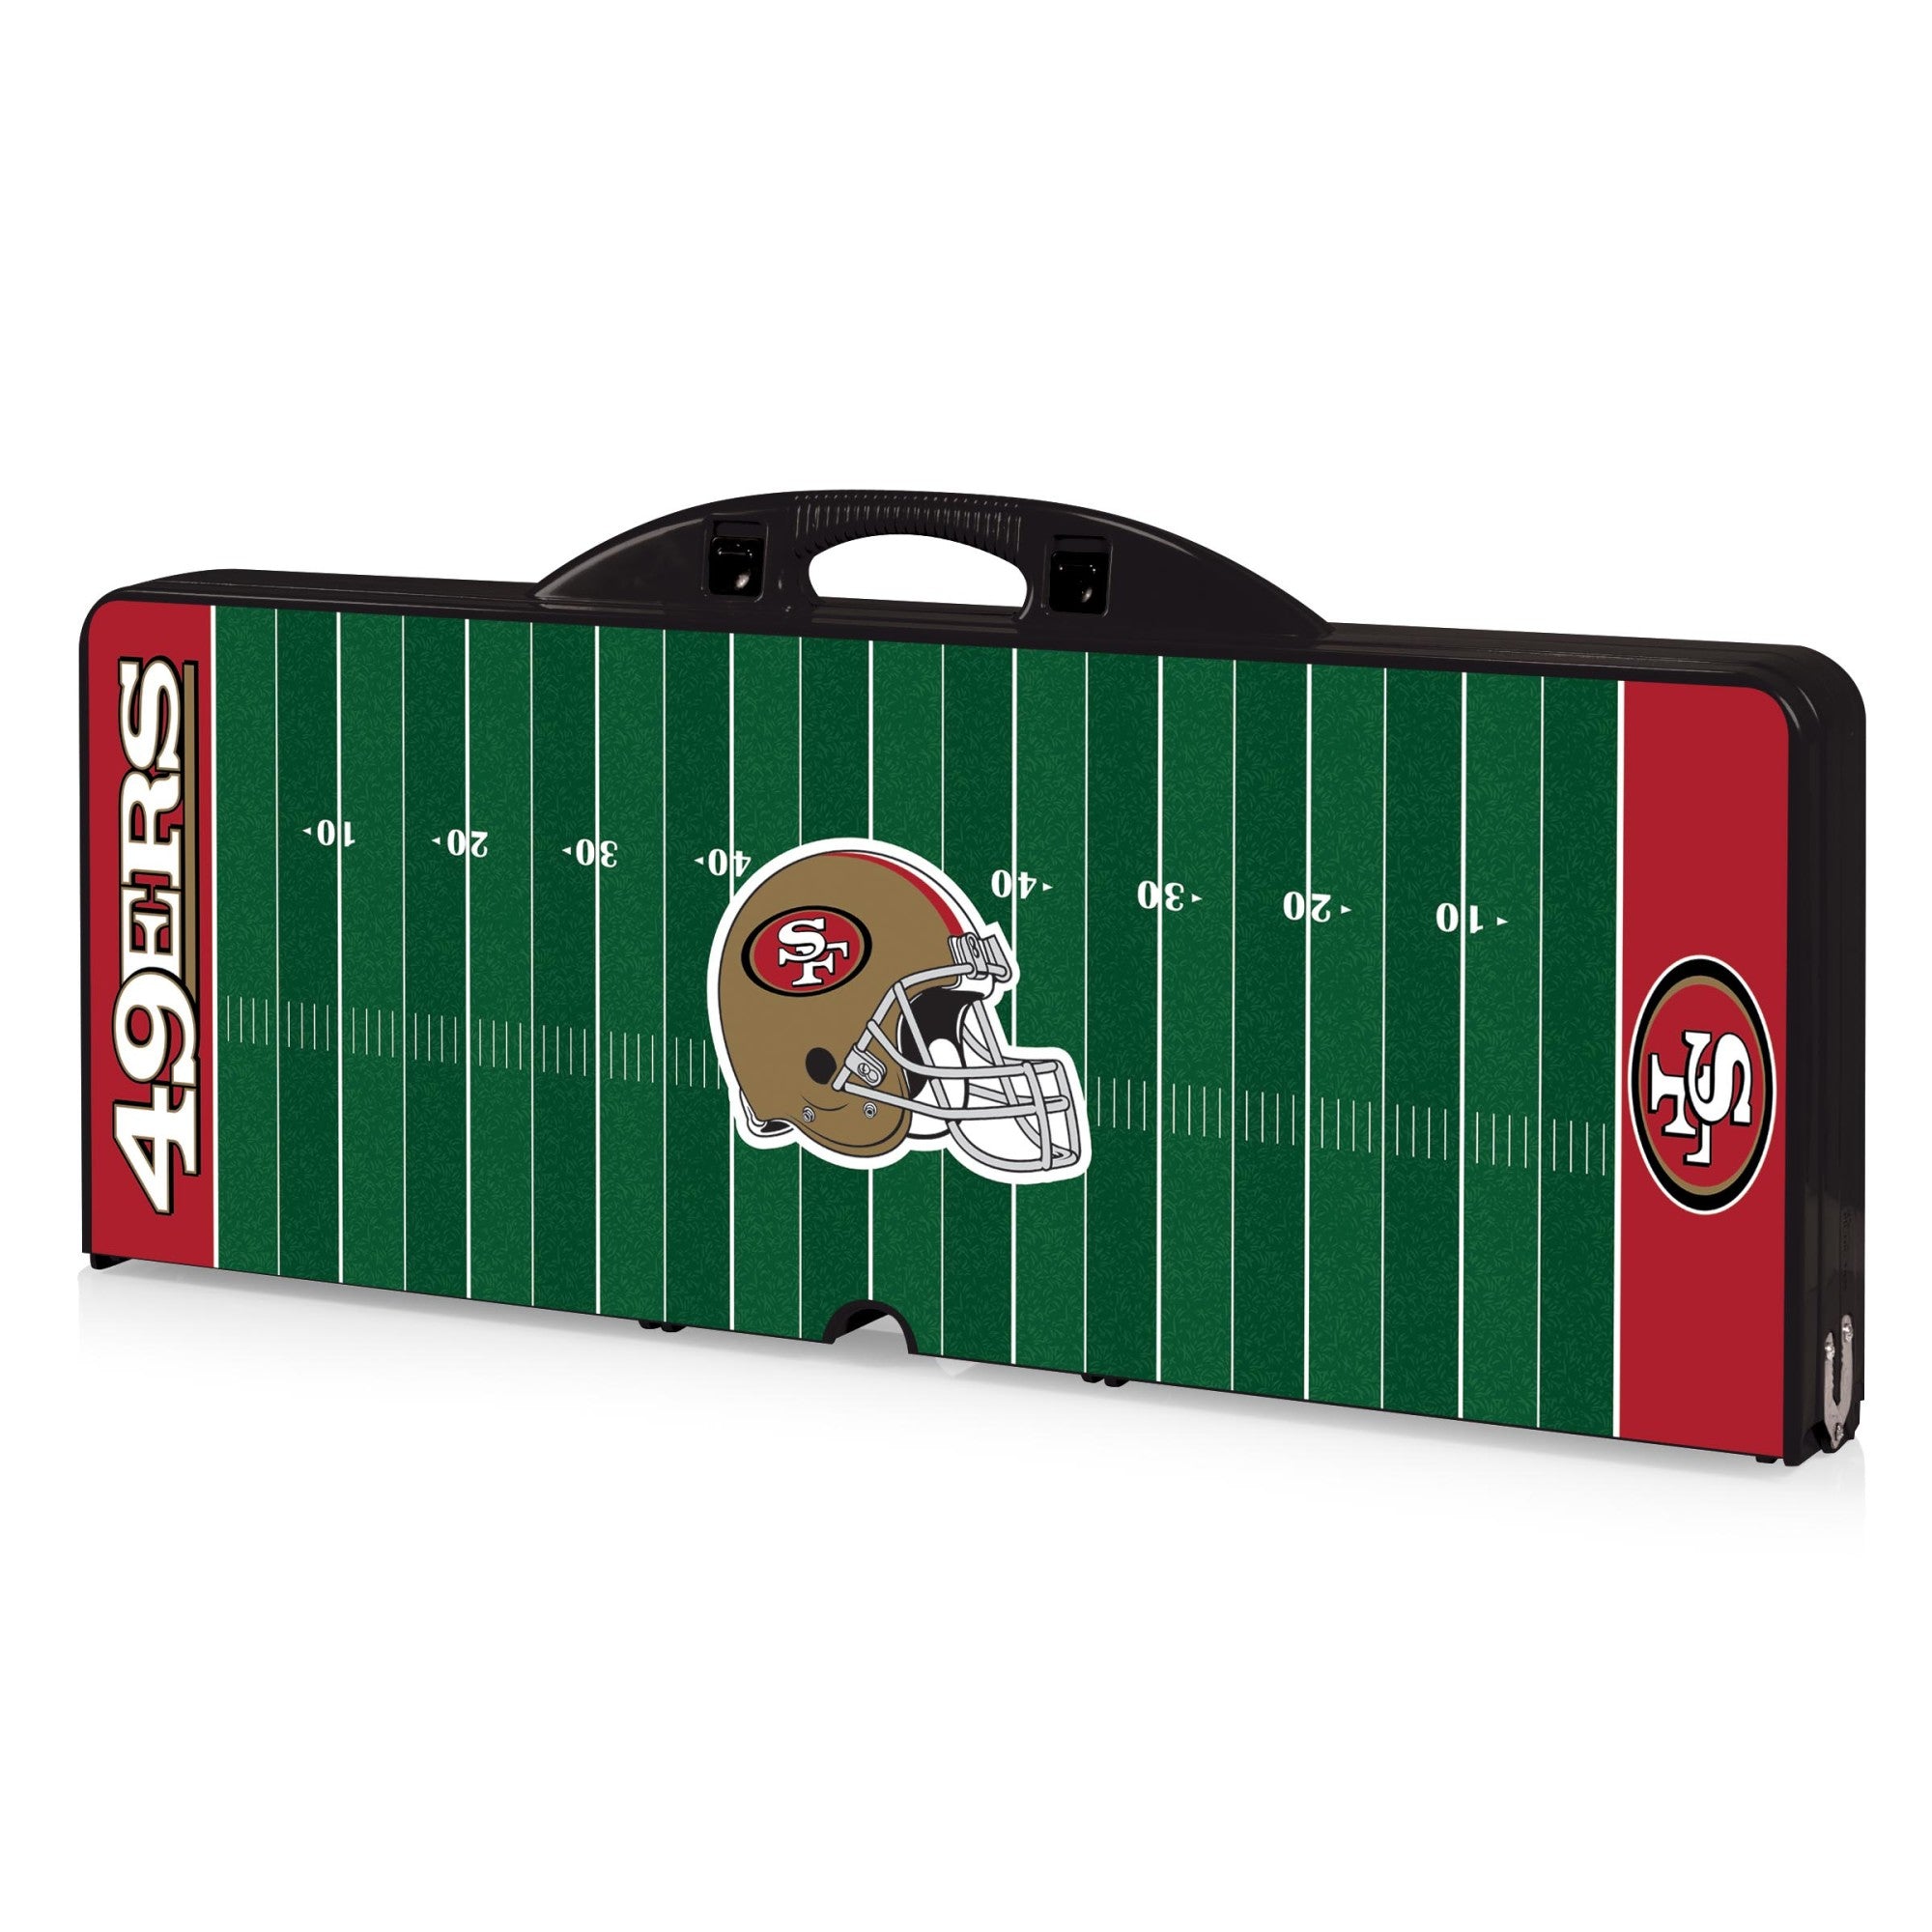 San Francisco 49ers - Picnic Table Portable Folding Table with Seats